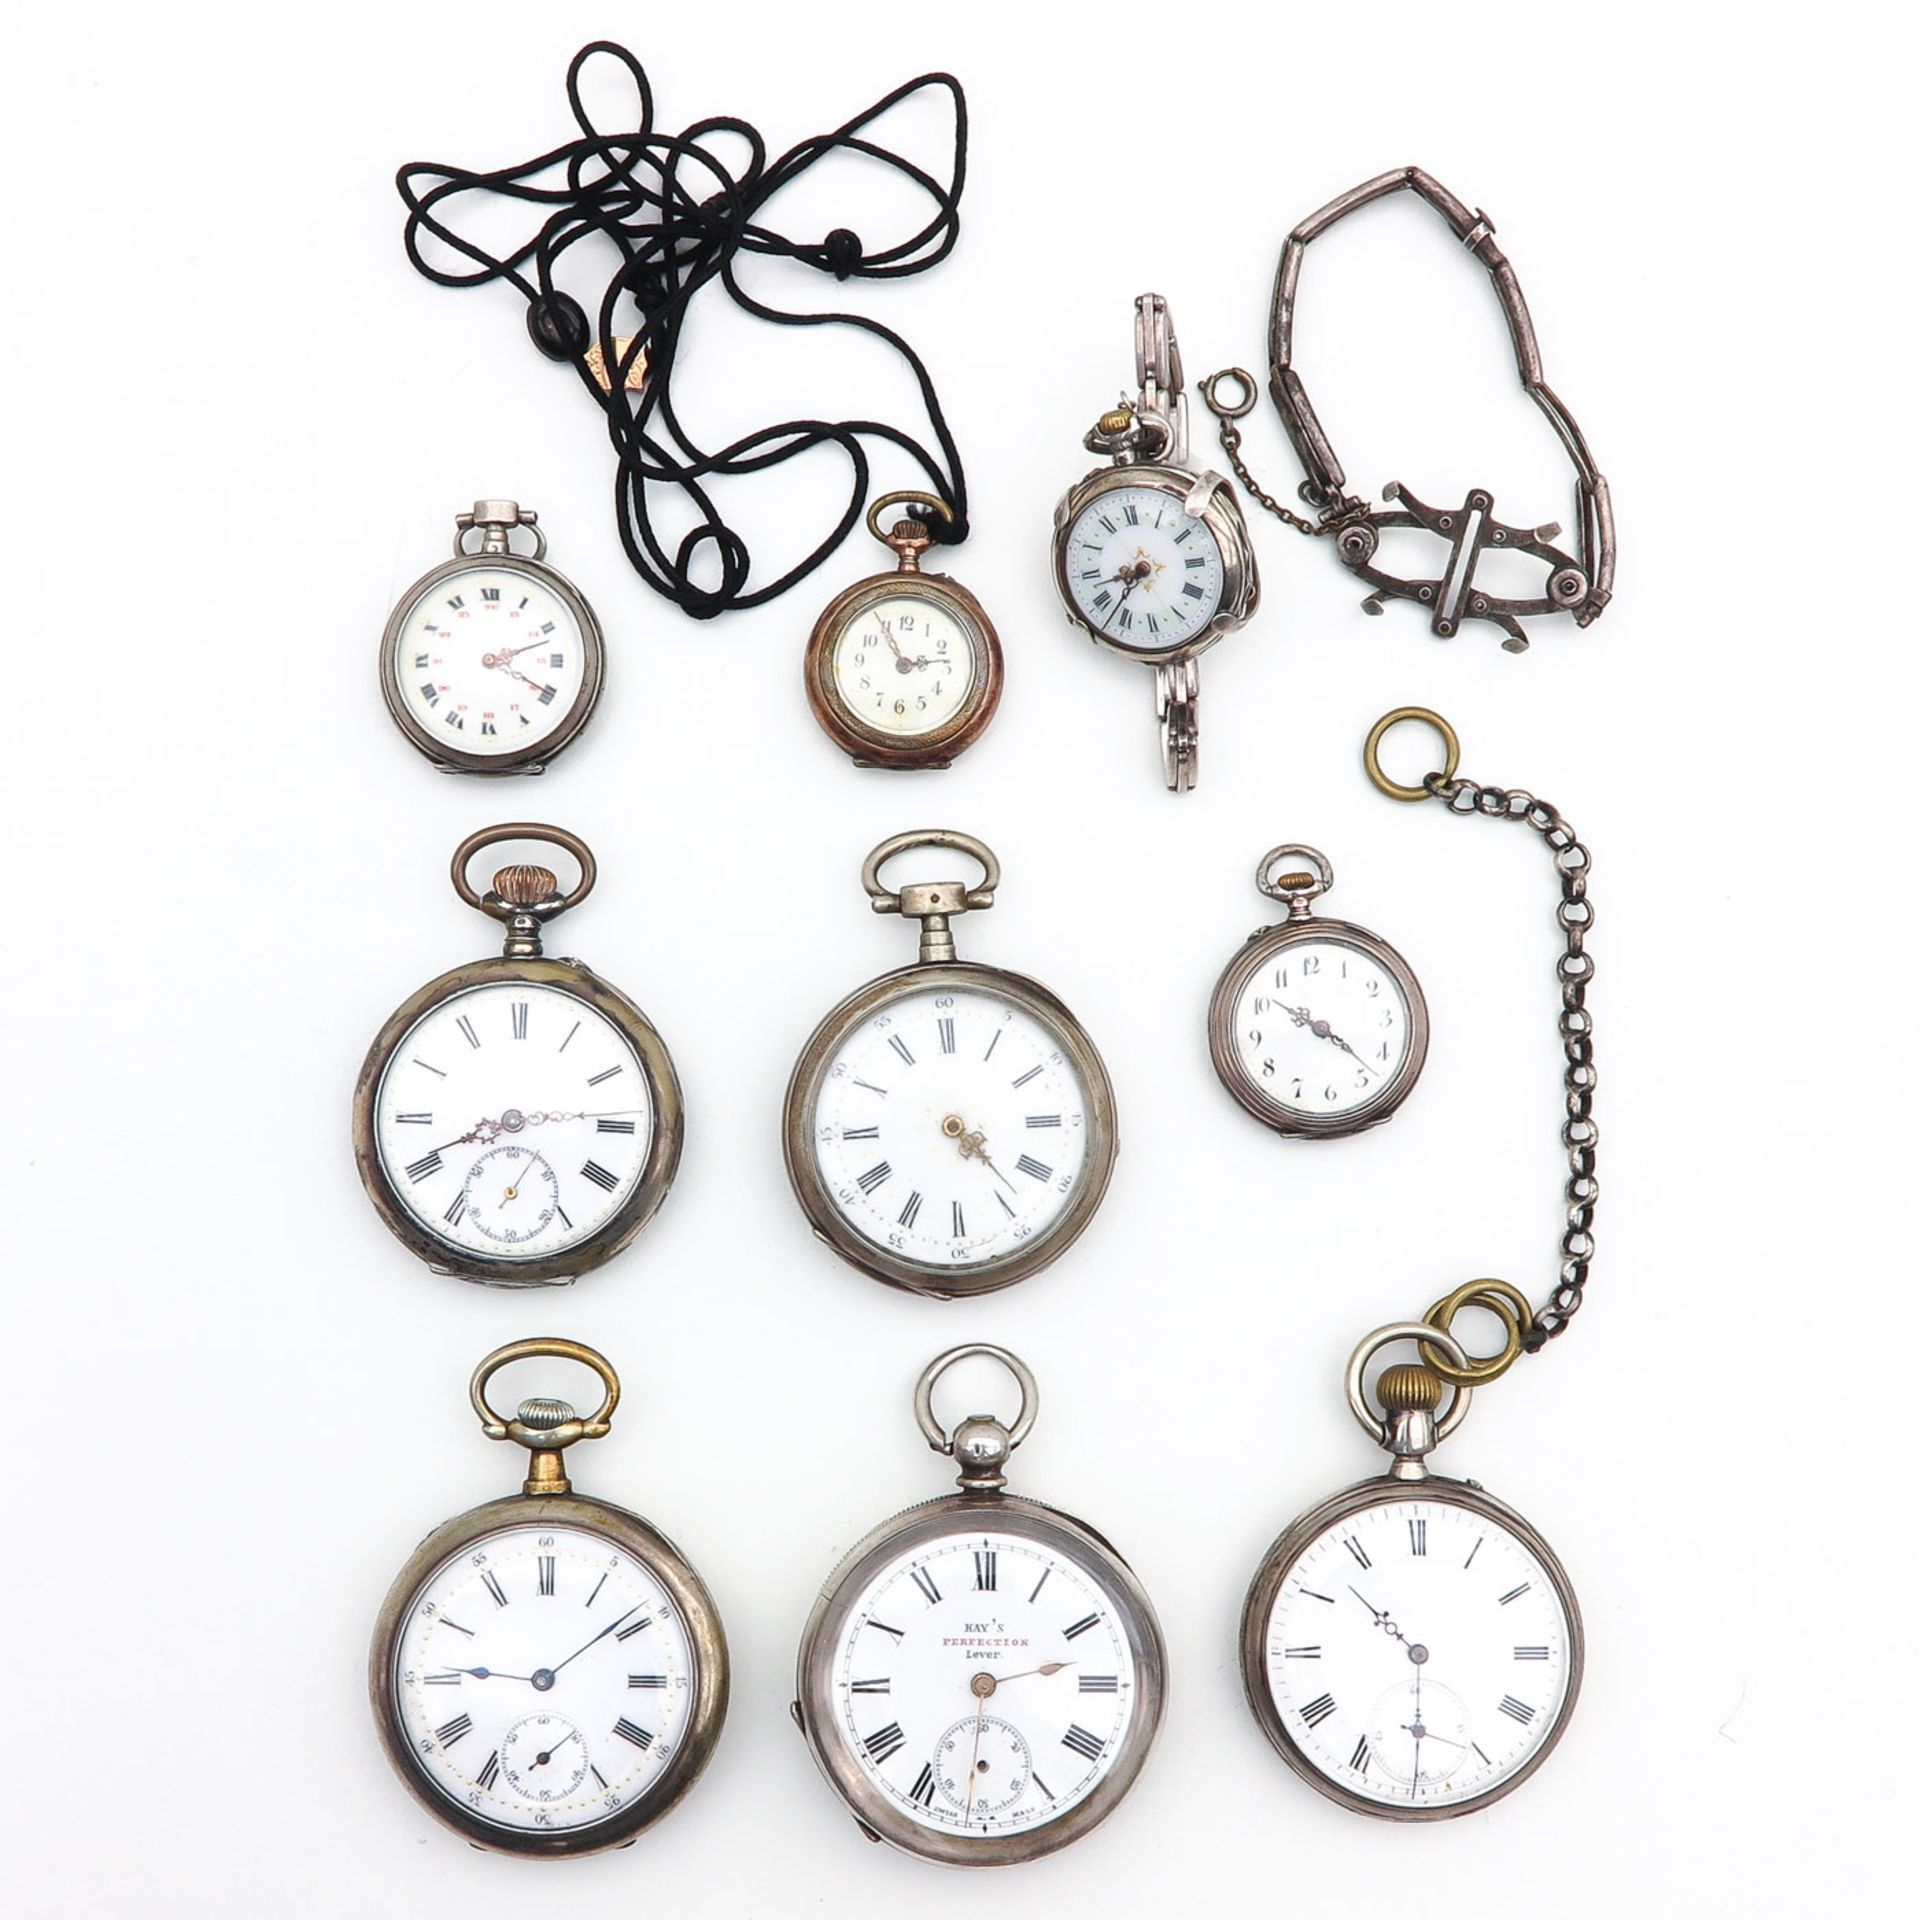 A Collection of 9 Silver Pocket Watches